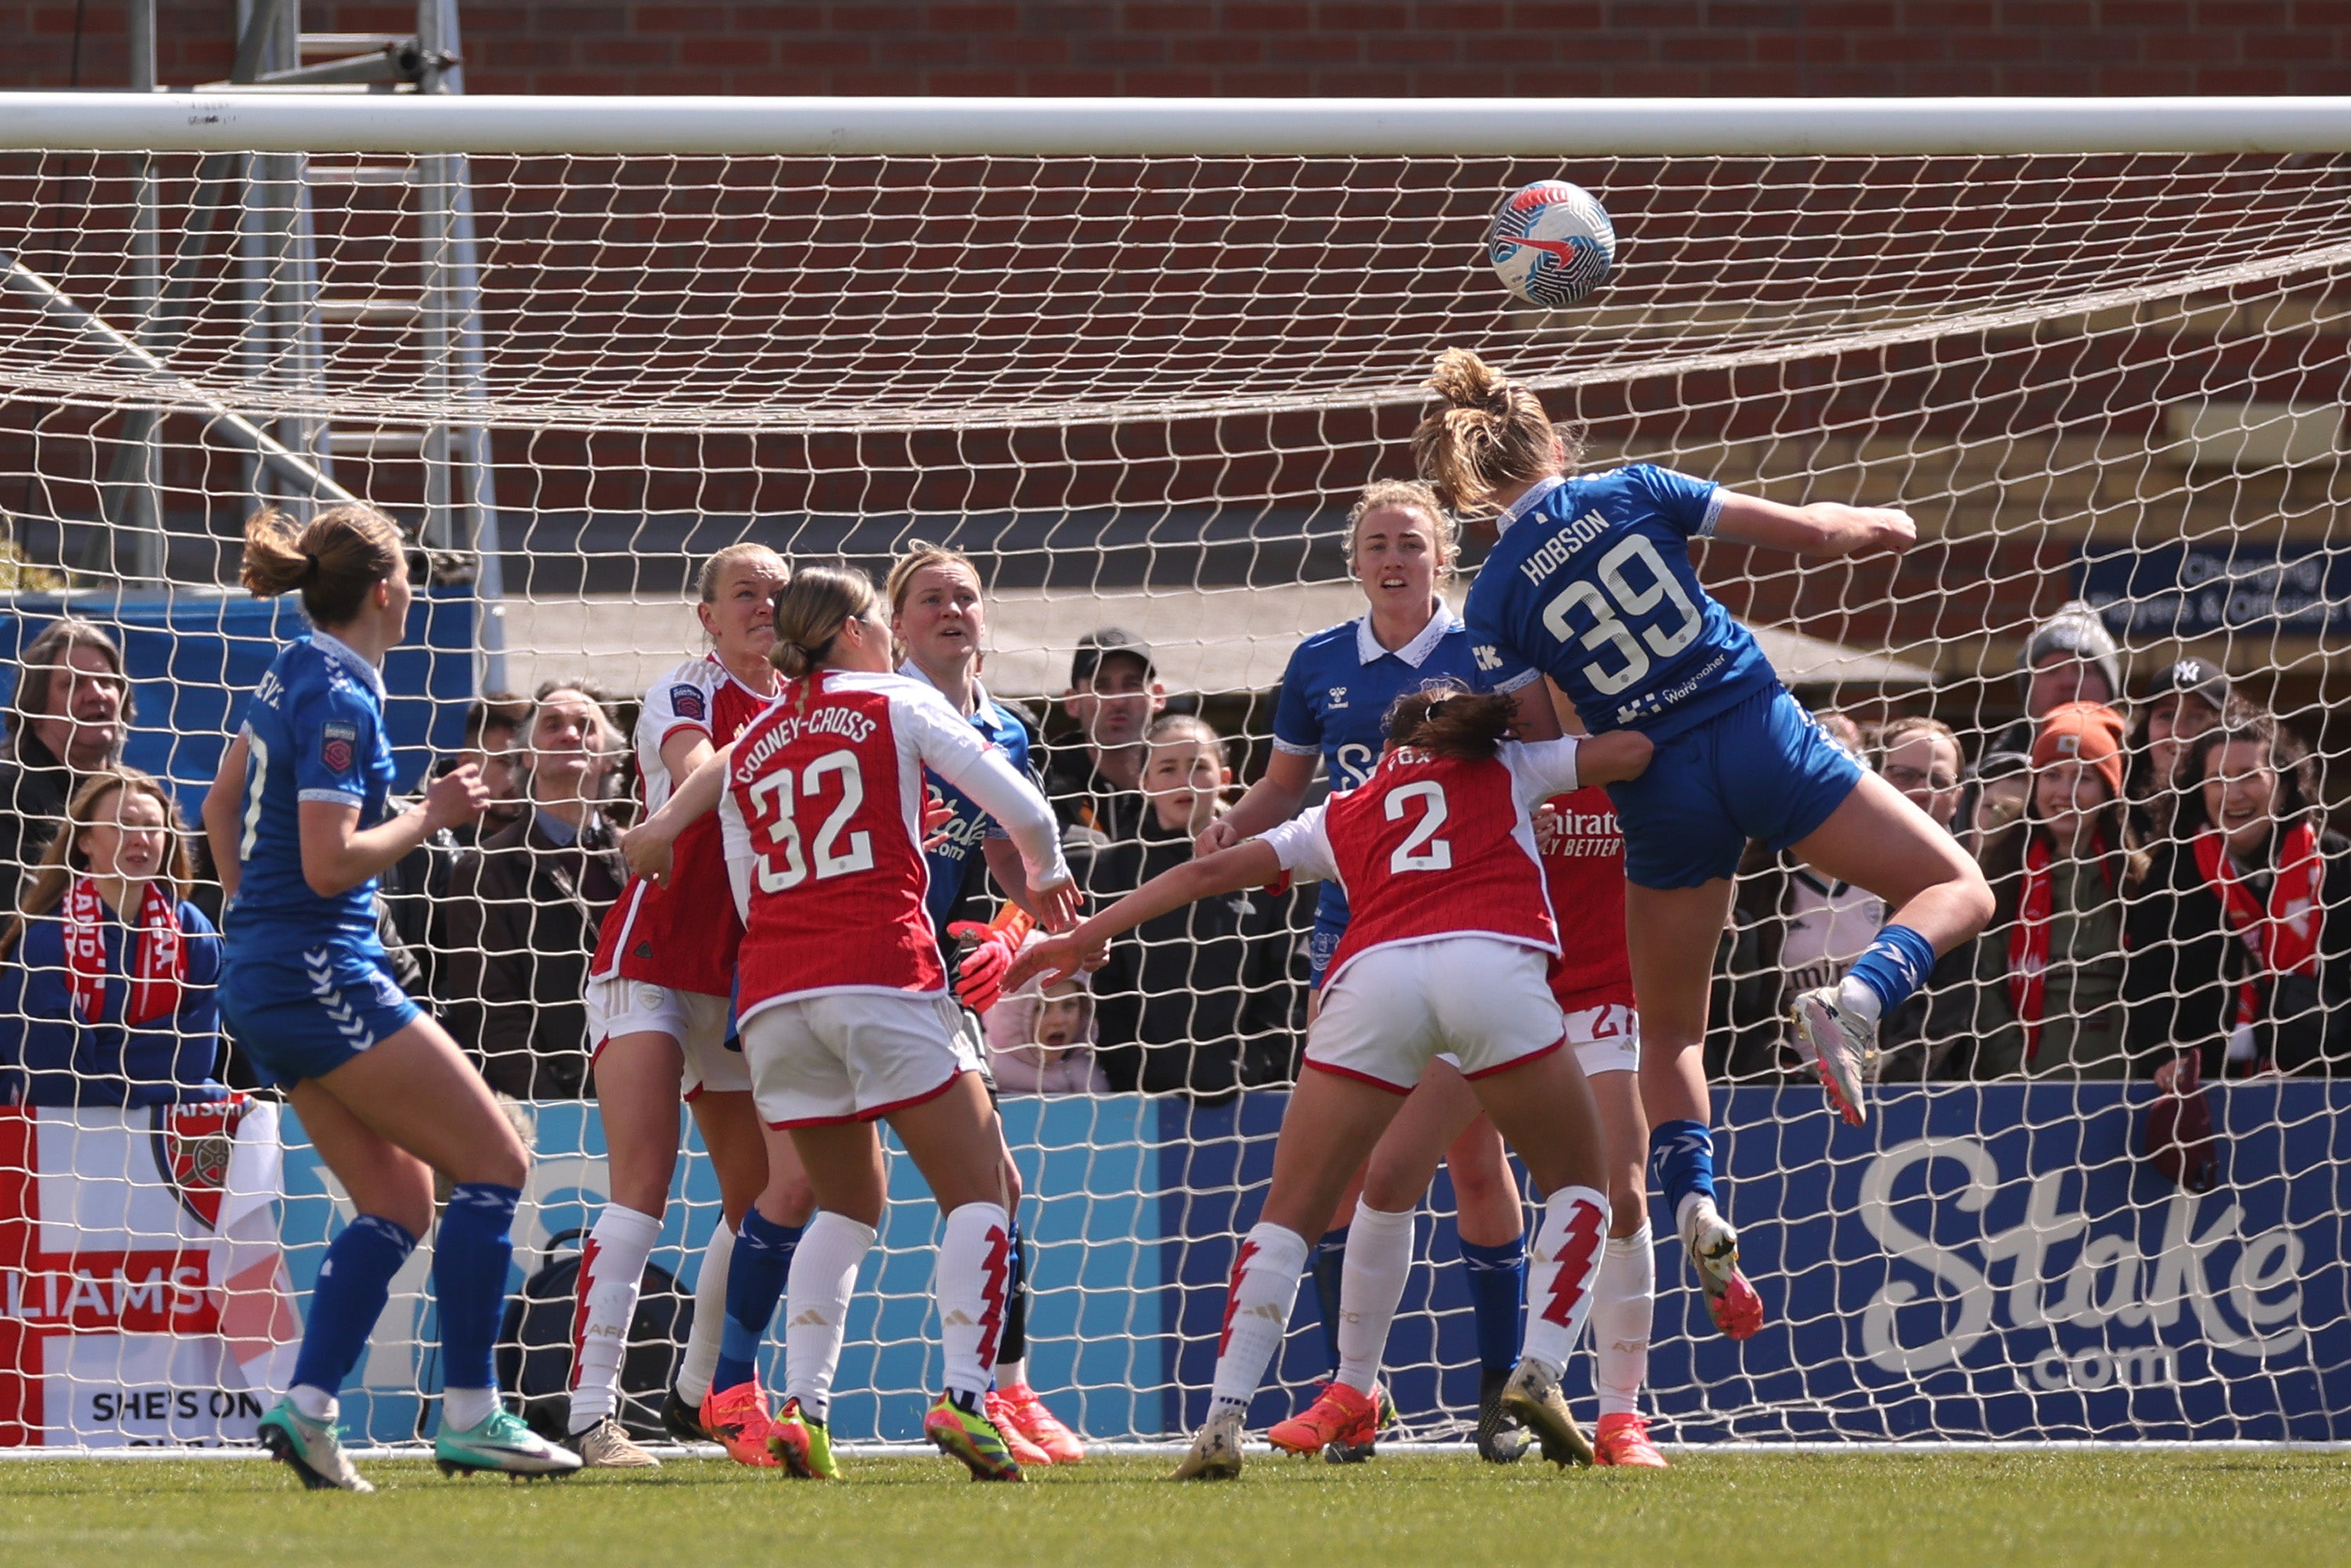 Hobson’s goal was a record in the WSL